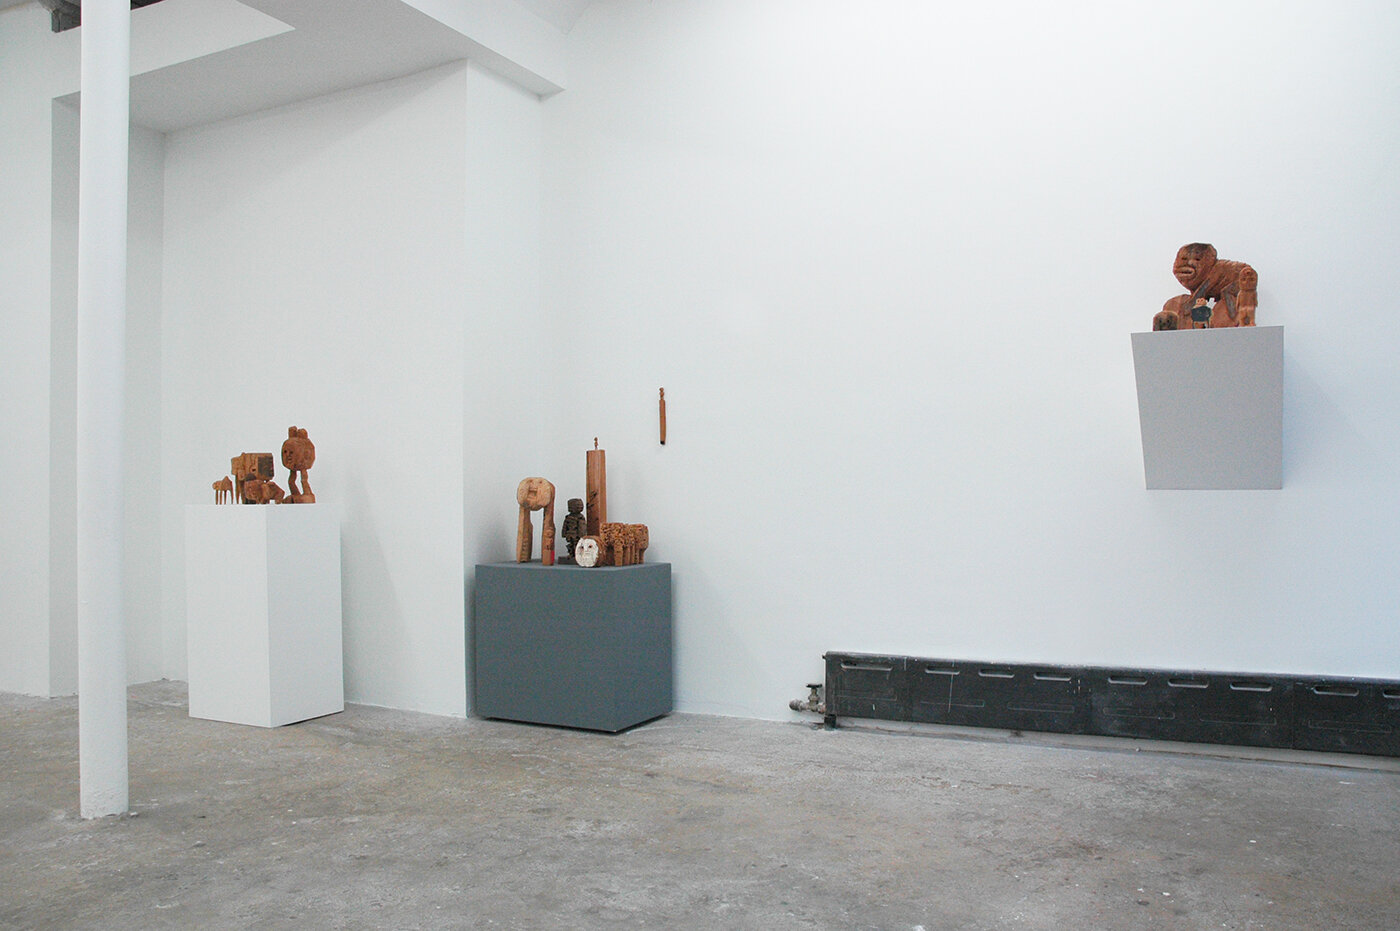 Installation image of sculptures by Hirosuke Yabe from his 2018 exhibition, Faithful Dog Man, at Cindy Rucker Gallery